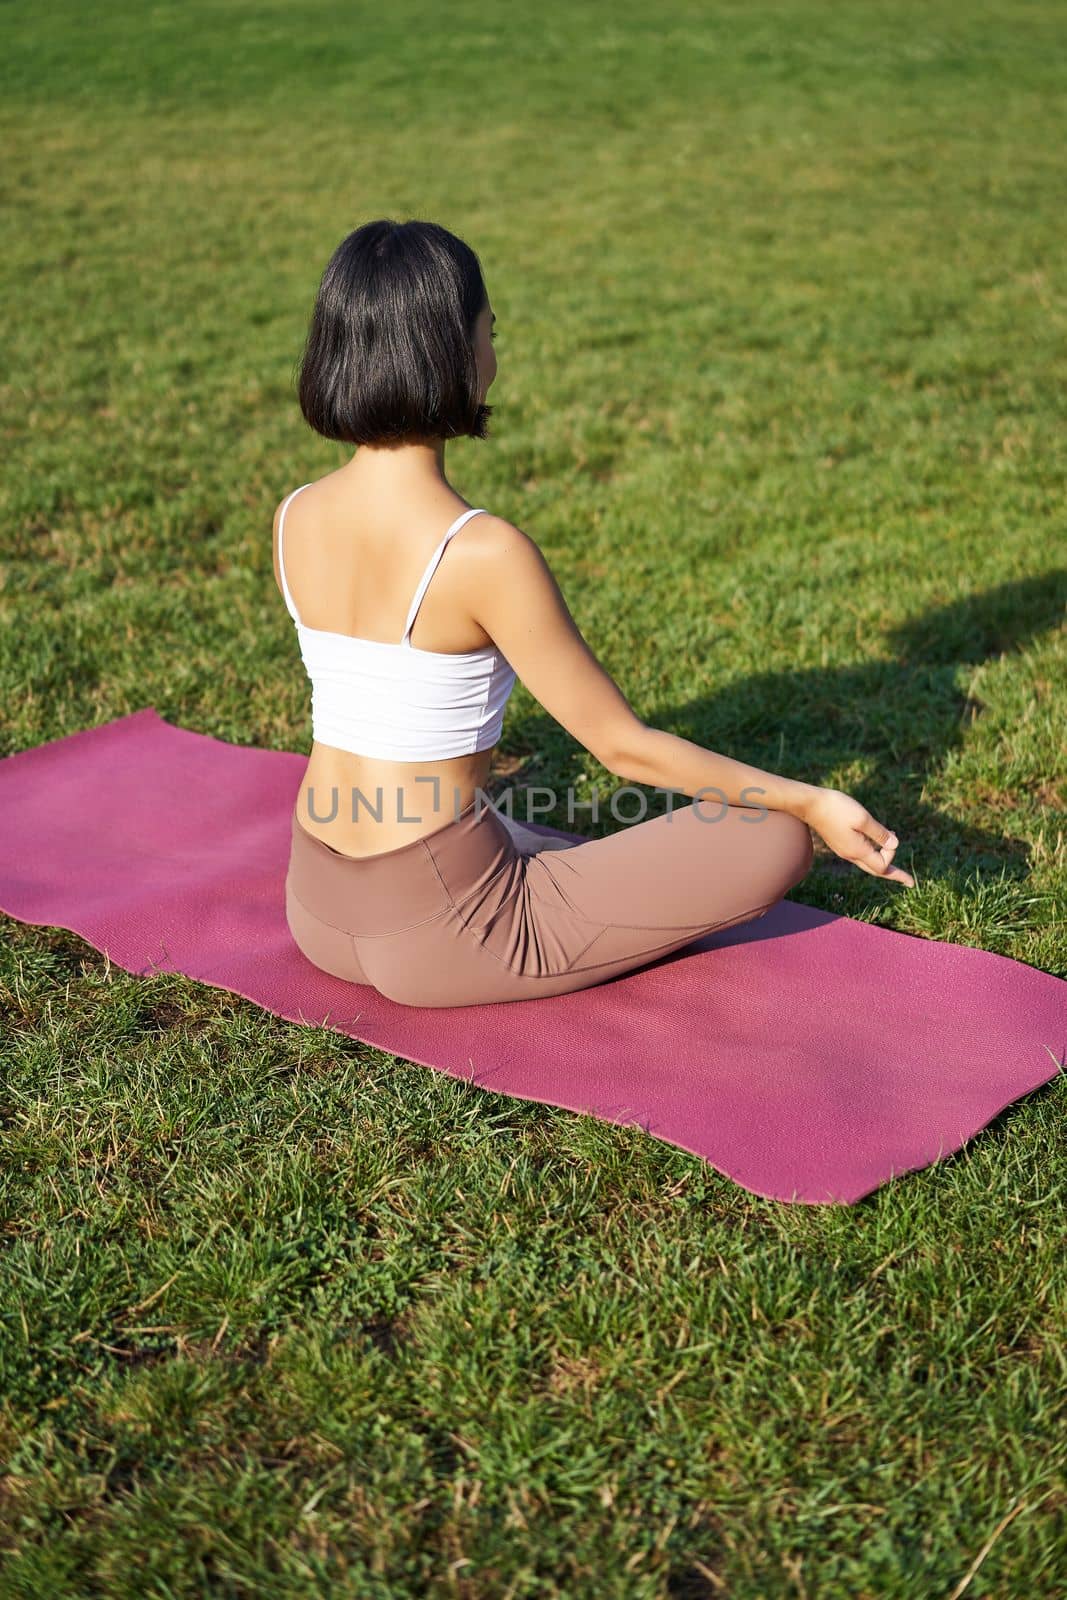 Rear view of woman silhouette doing yoga, sitting on fitness mat and meditating on green lawn.